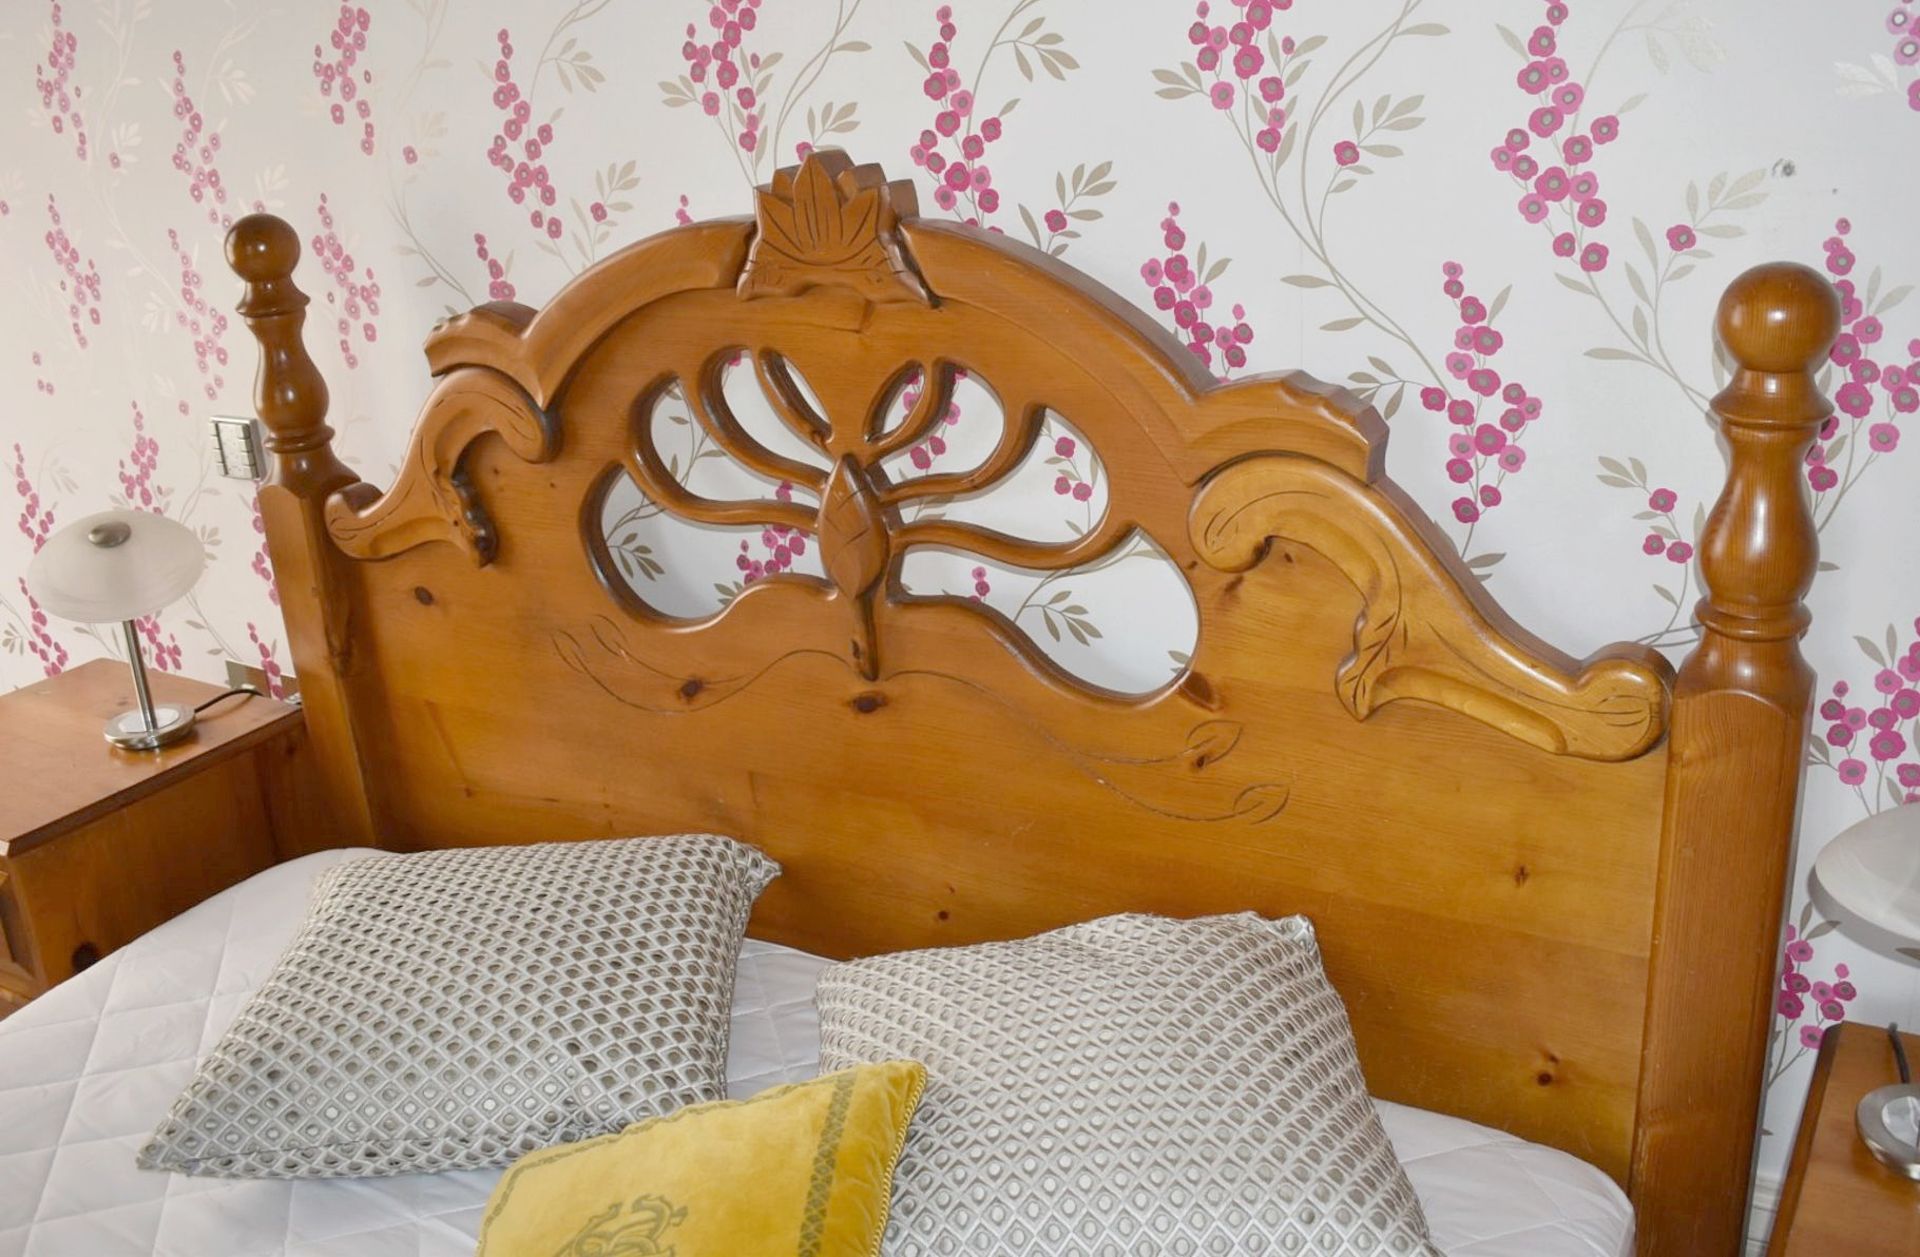 1 x Country Farmhouse Solid Pine Kingsize Bed Frame Featuring An Ornate Headboard & Footboard - NO - Image 6 of 7